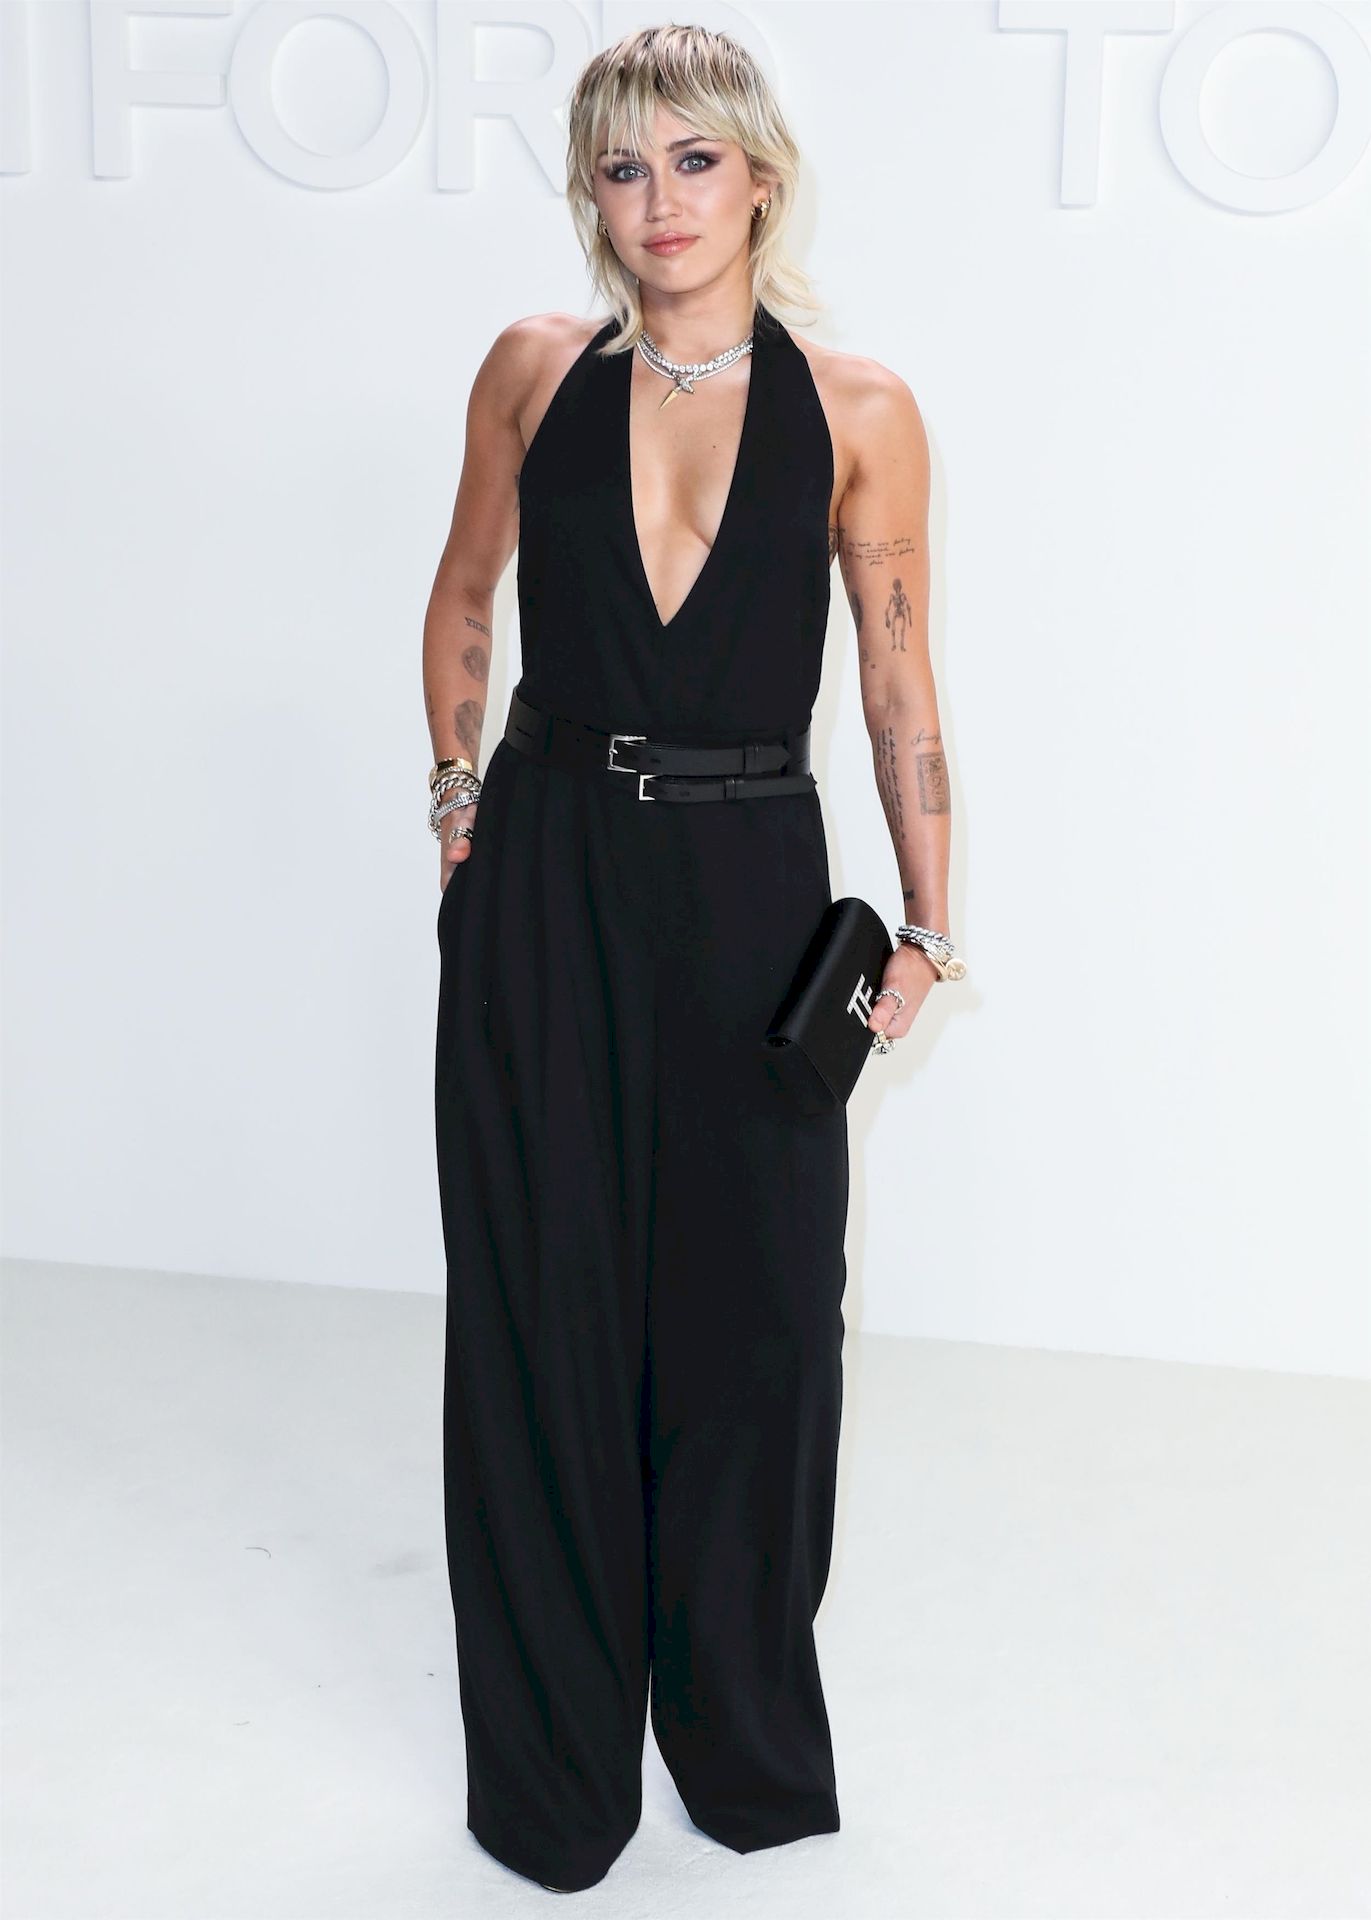 Miley-Cyrus-Looks-Sexy-at-the-Tom-Ford-Autumn_Winter-2020-Fashion-Show-0027.jpg